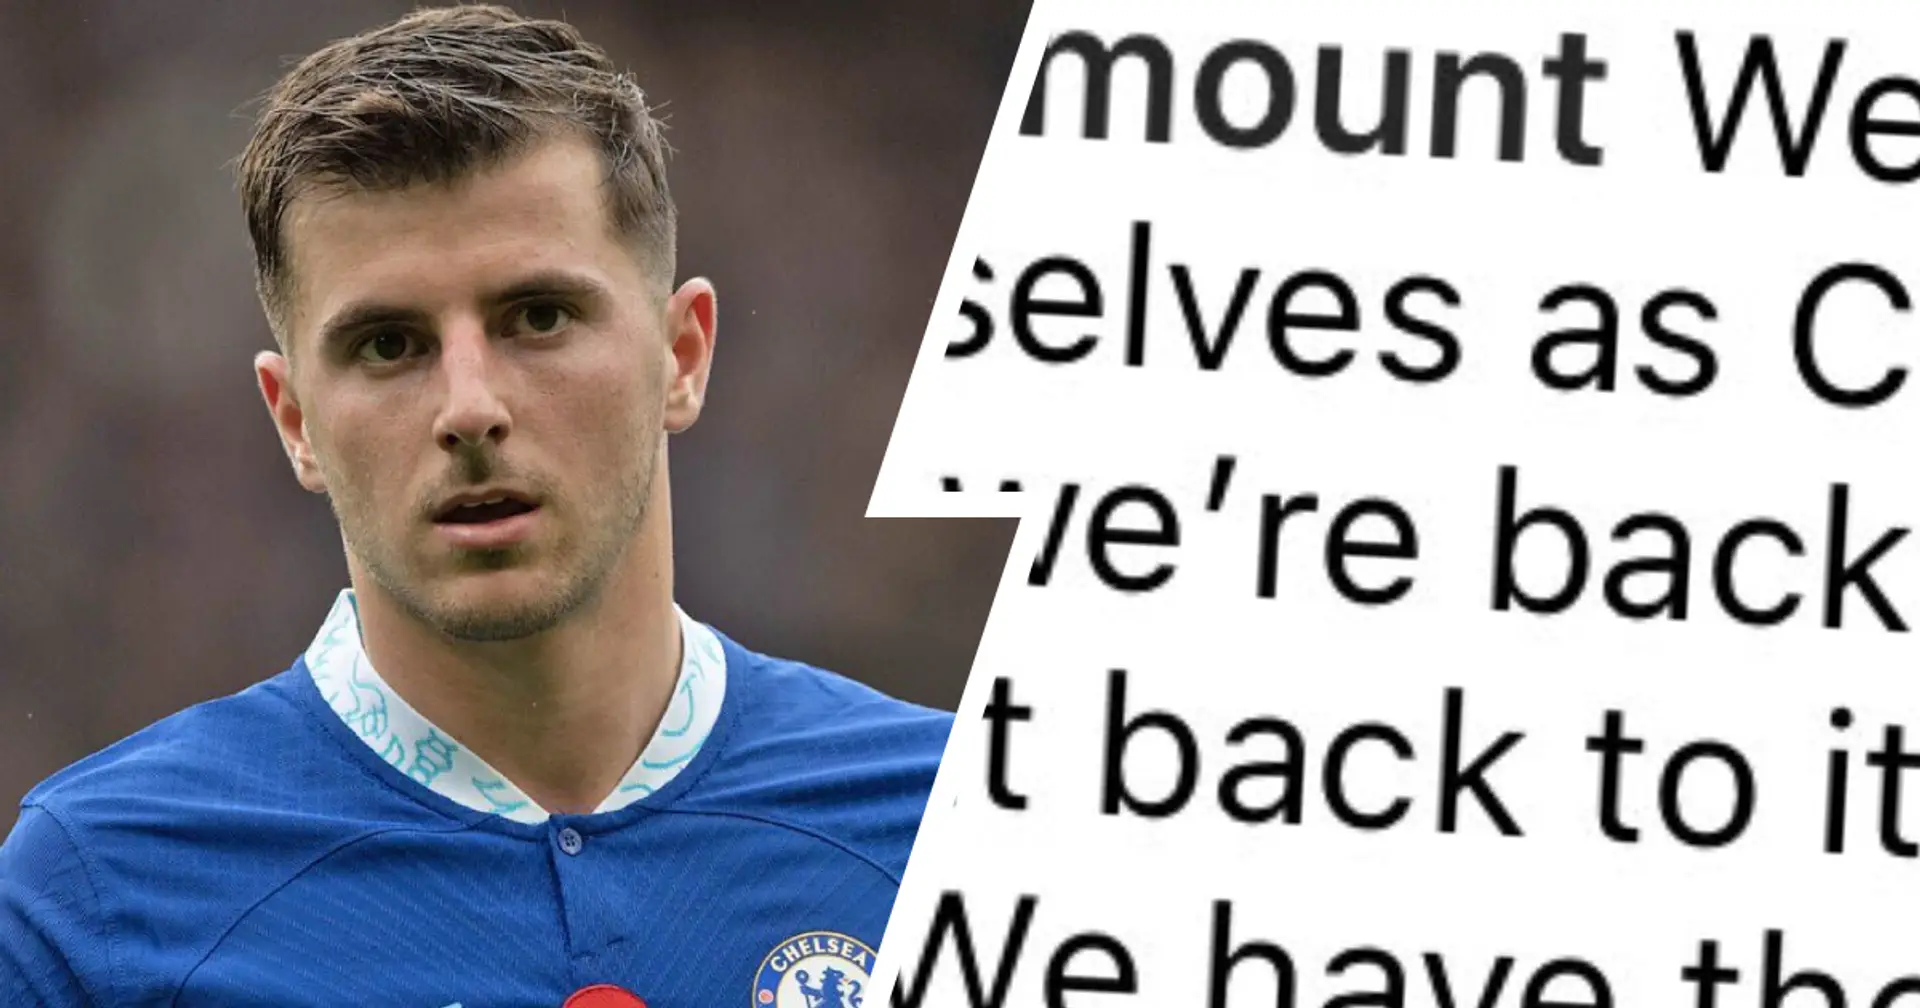 'You all deserve more from us': Mount sends message to Chelsea fans after Newcastle defeat